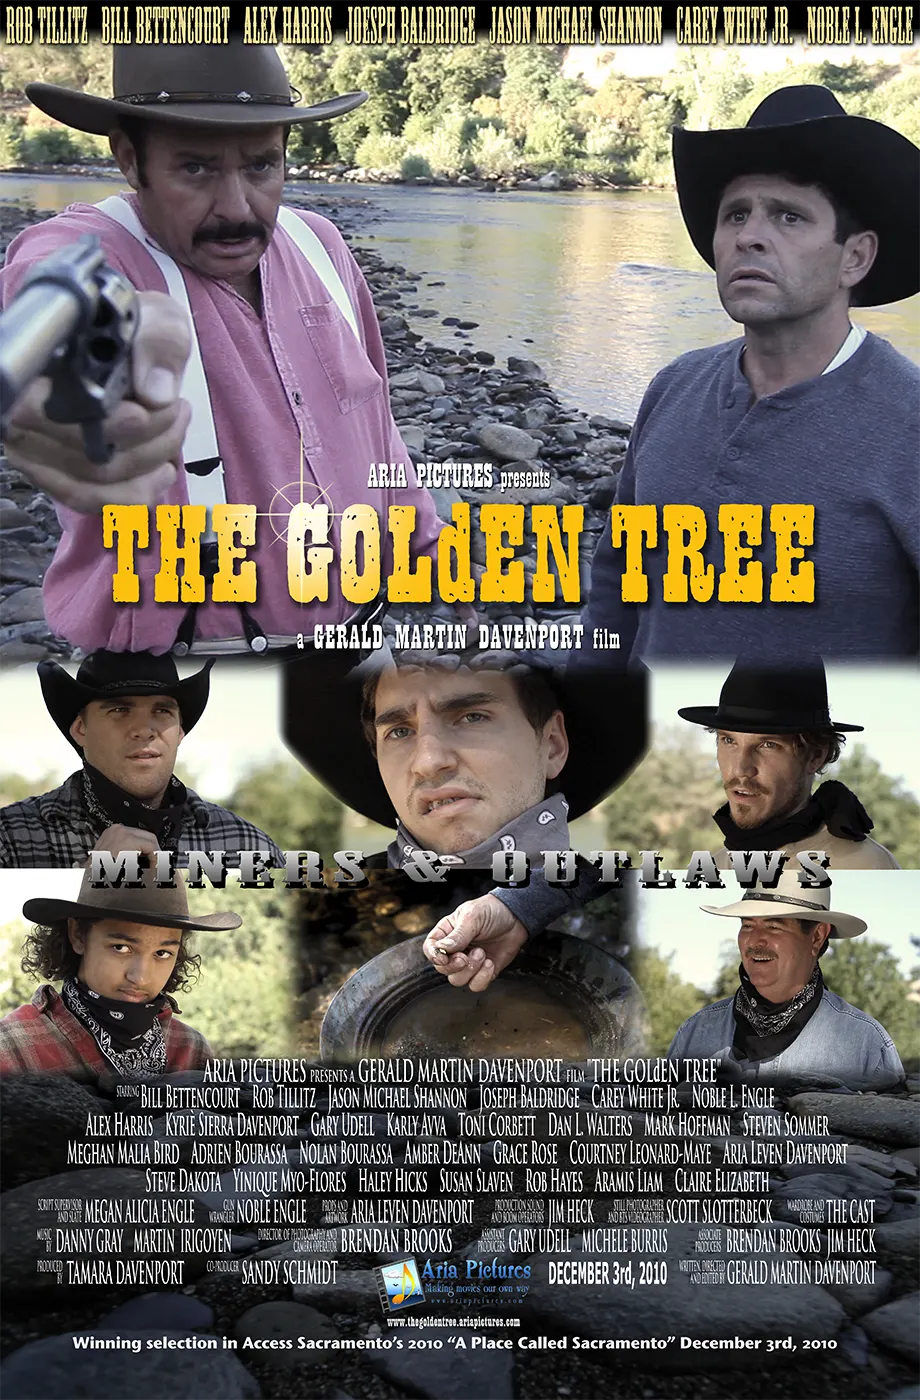 1855 Miners & Outlaws poster from THE GOLdEN TREE (2010).